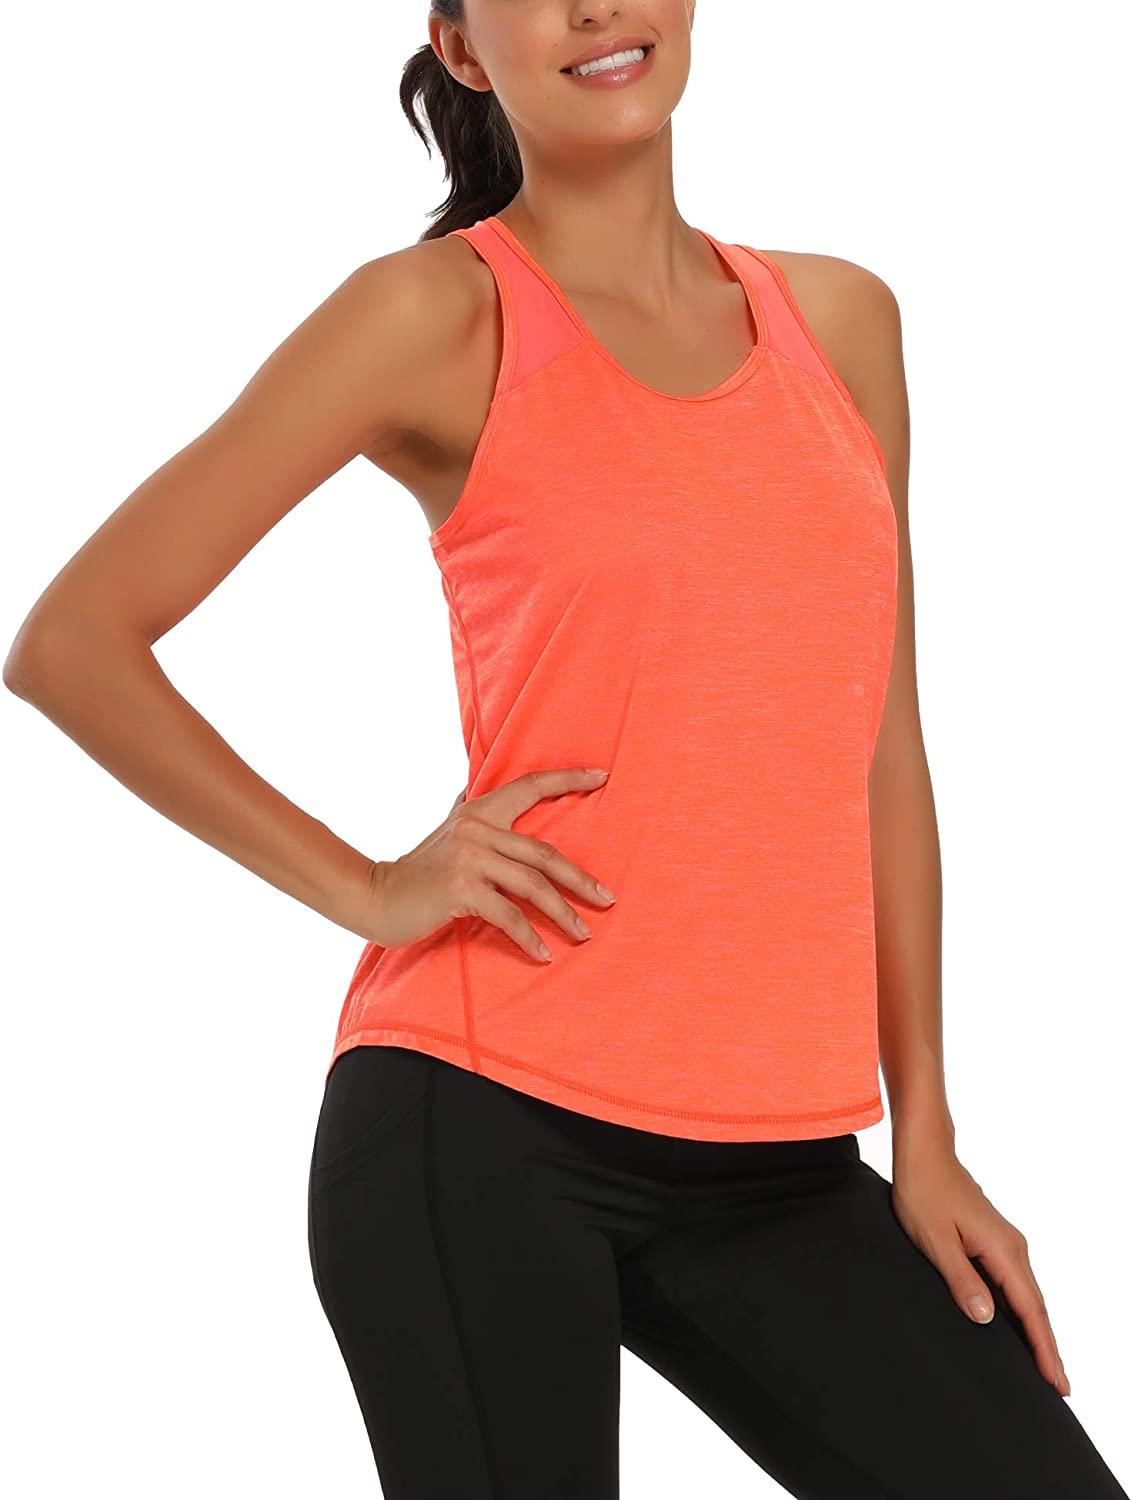 Womens Cute Workout Clothes Mesh Yoga Tops Exercise Gym Shirts Running Tank  Tops 